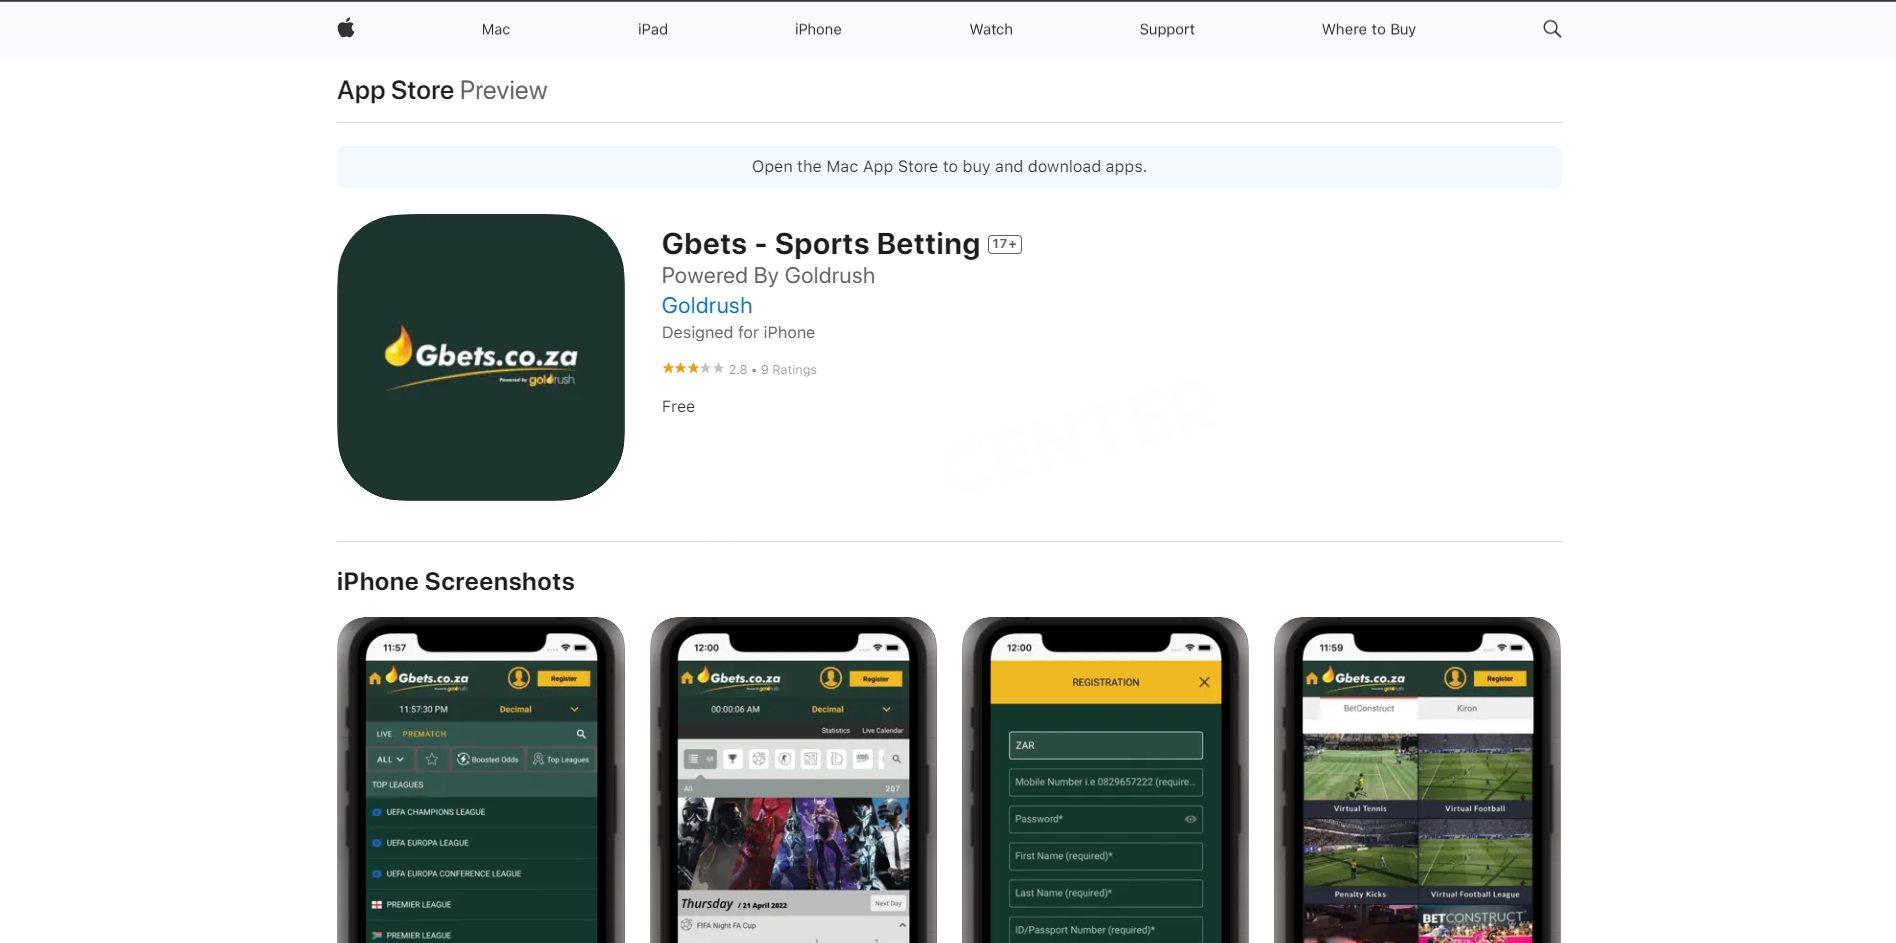 Gbets mobile app in the AppStore